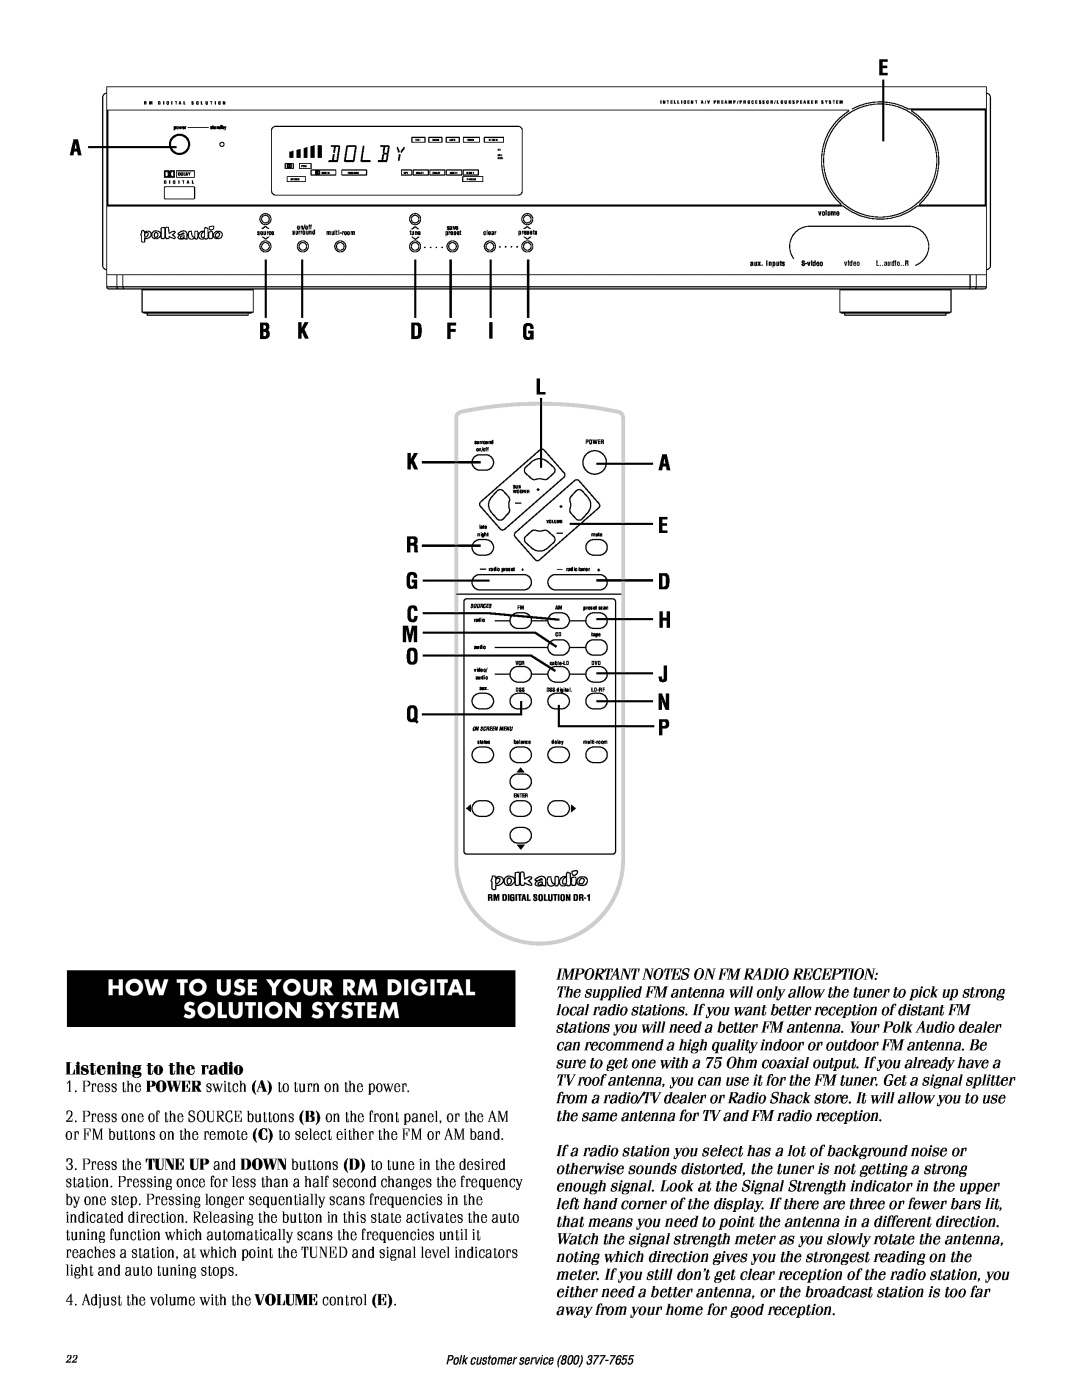 Polk Audio RMDS-1 instruction manual How To Use Your Rm Digital Solution System, Listening to the radio 